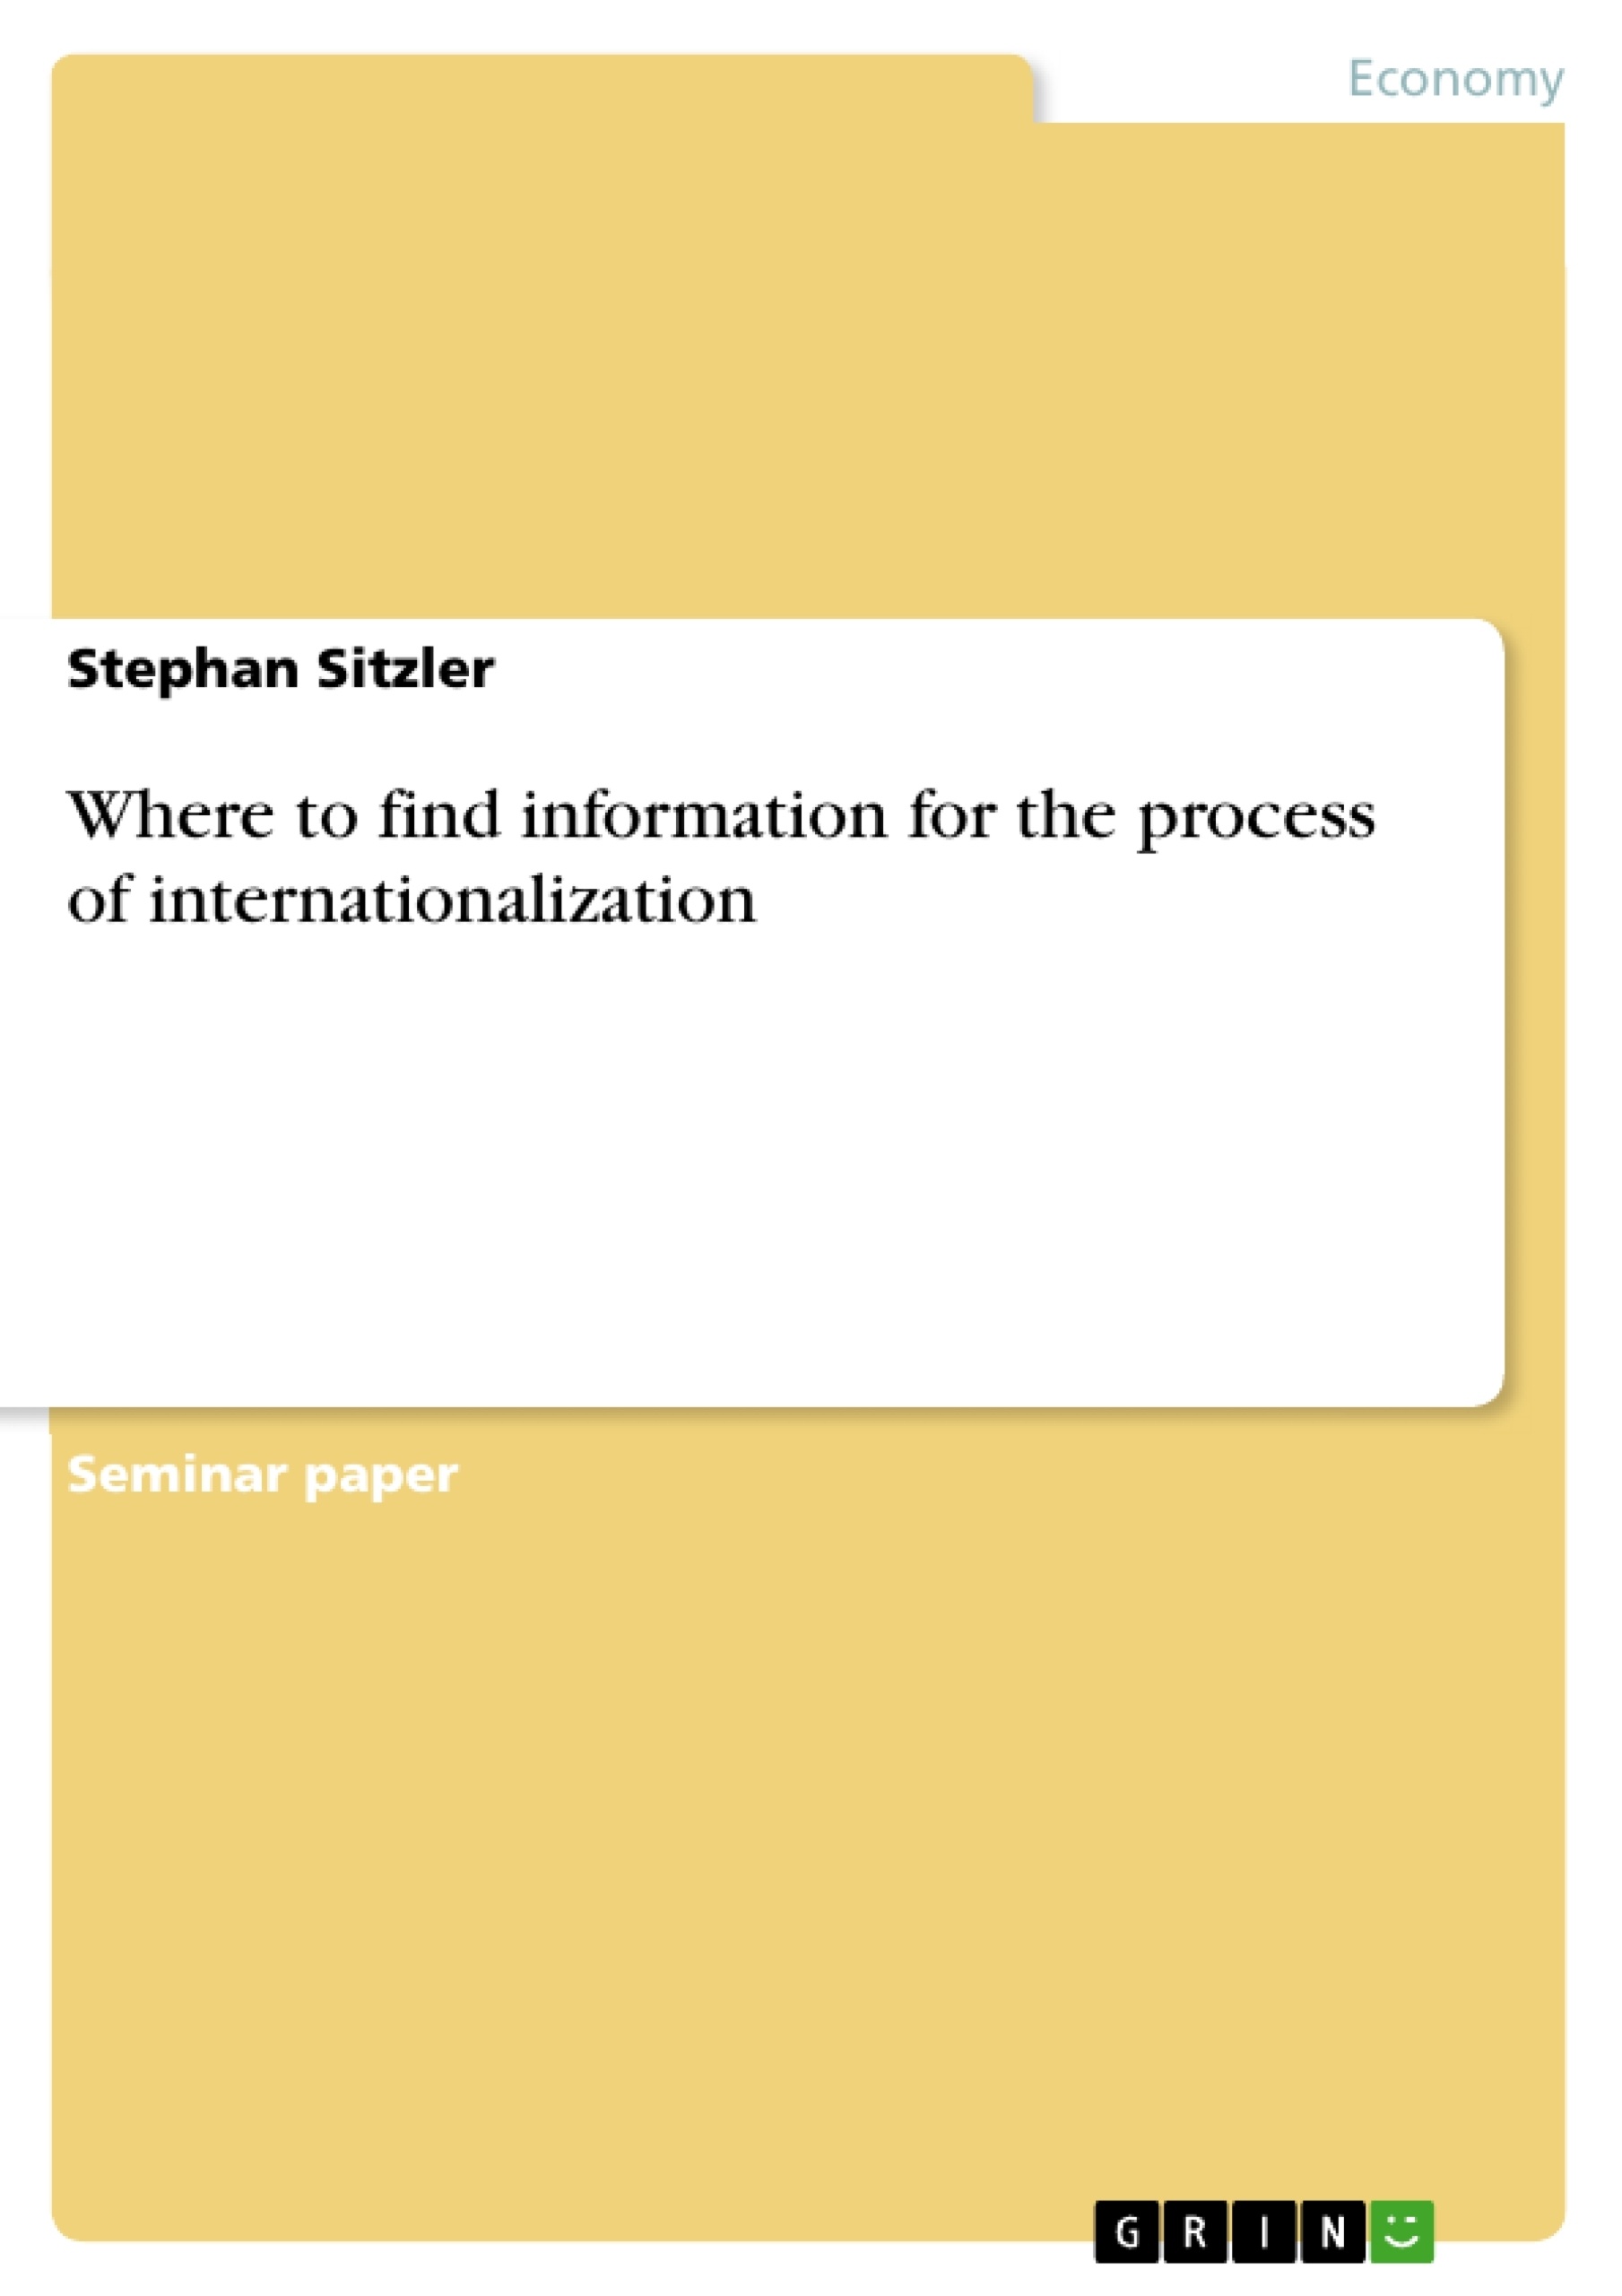 Title: Where to find information for the process of internationalization